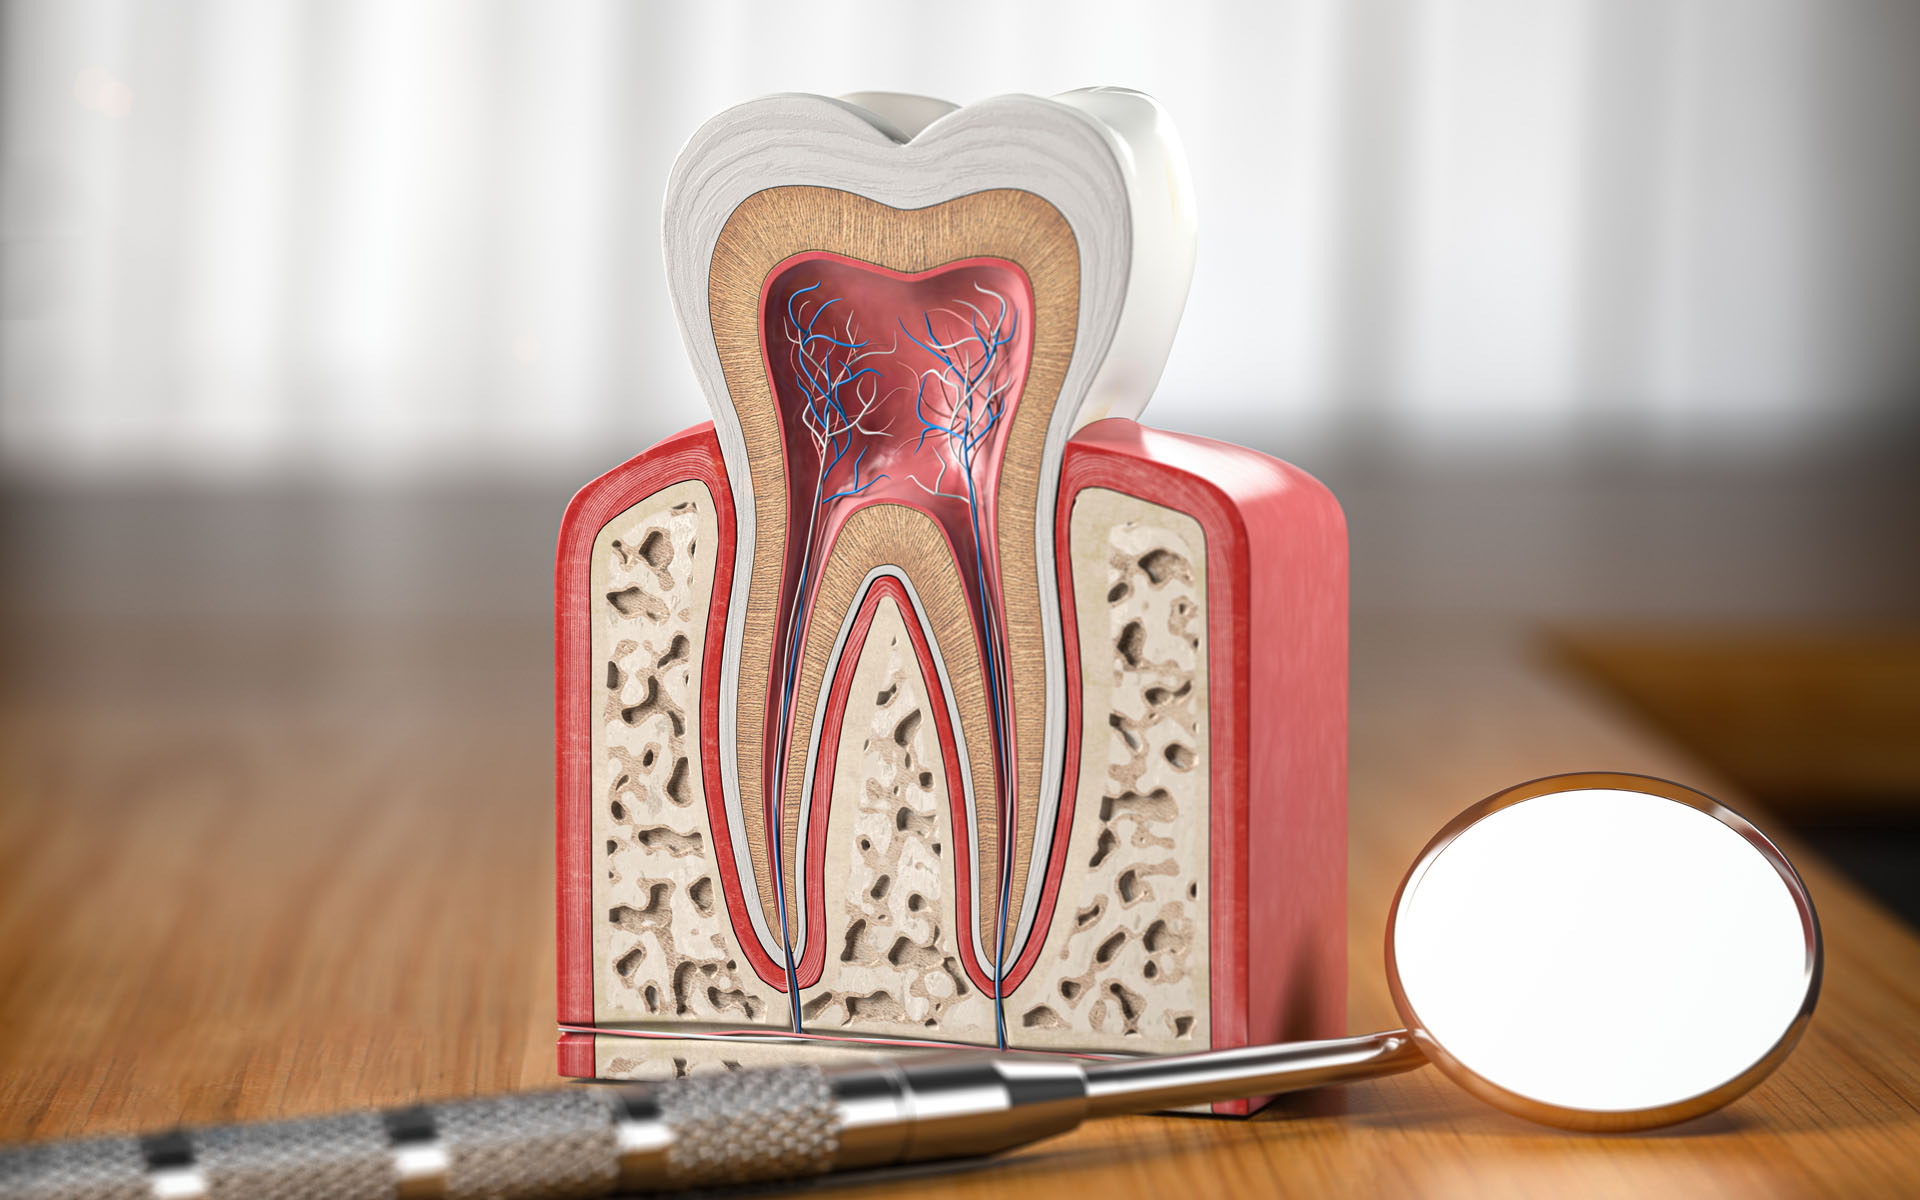 https://shifadentalclinic.in/wp-content/uploads/2022/10/root-canal-treatment.jpg